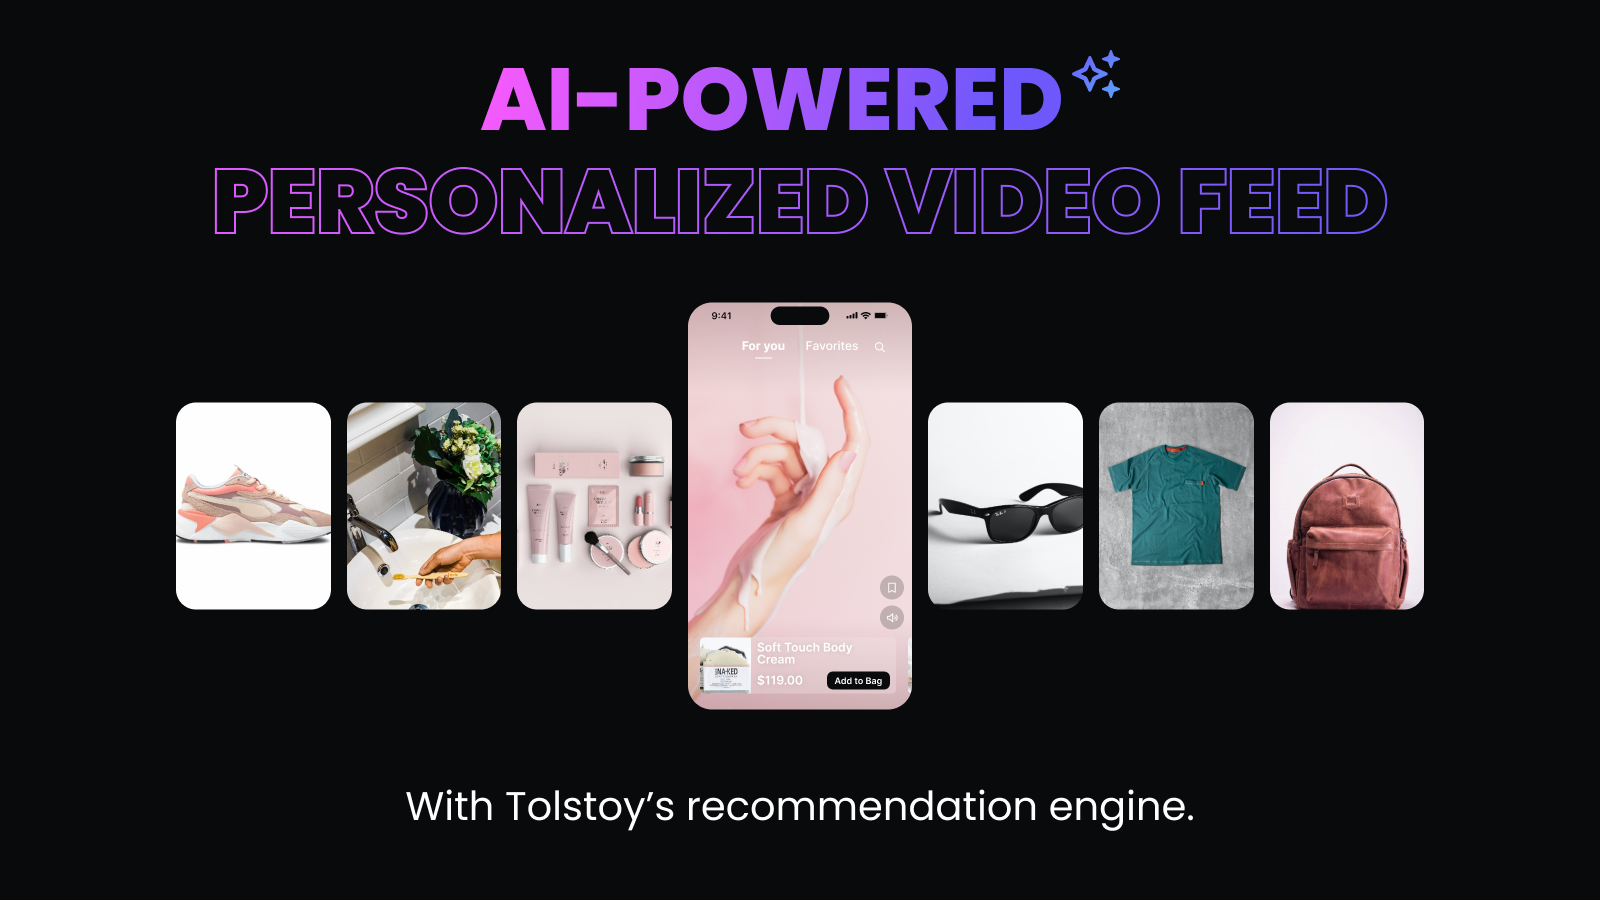 AI-powered personalized video feed based on video recommendation